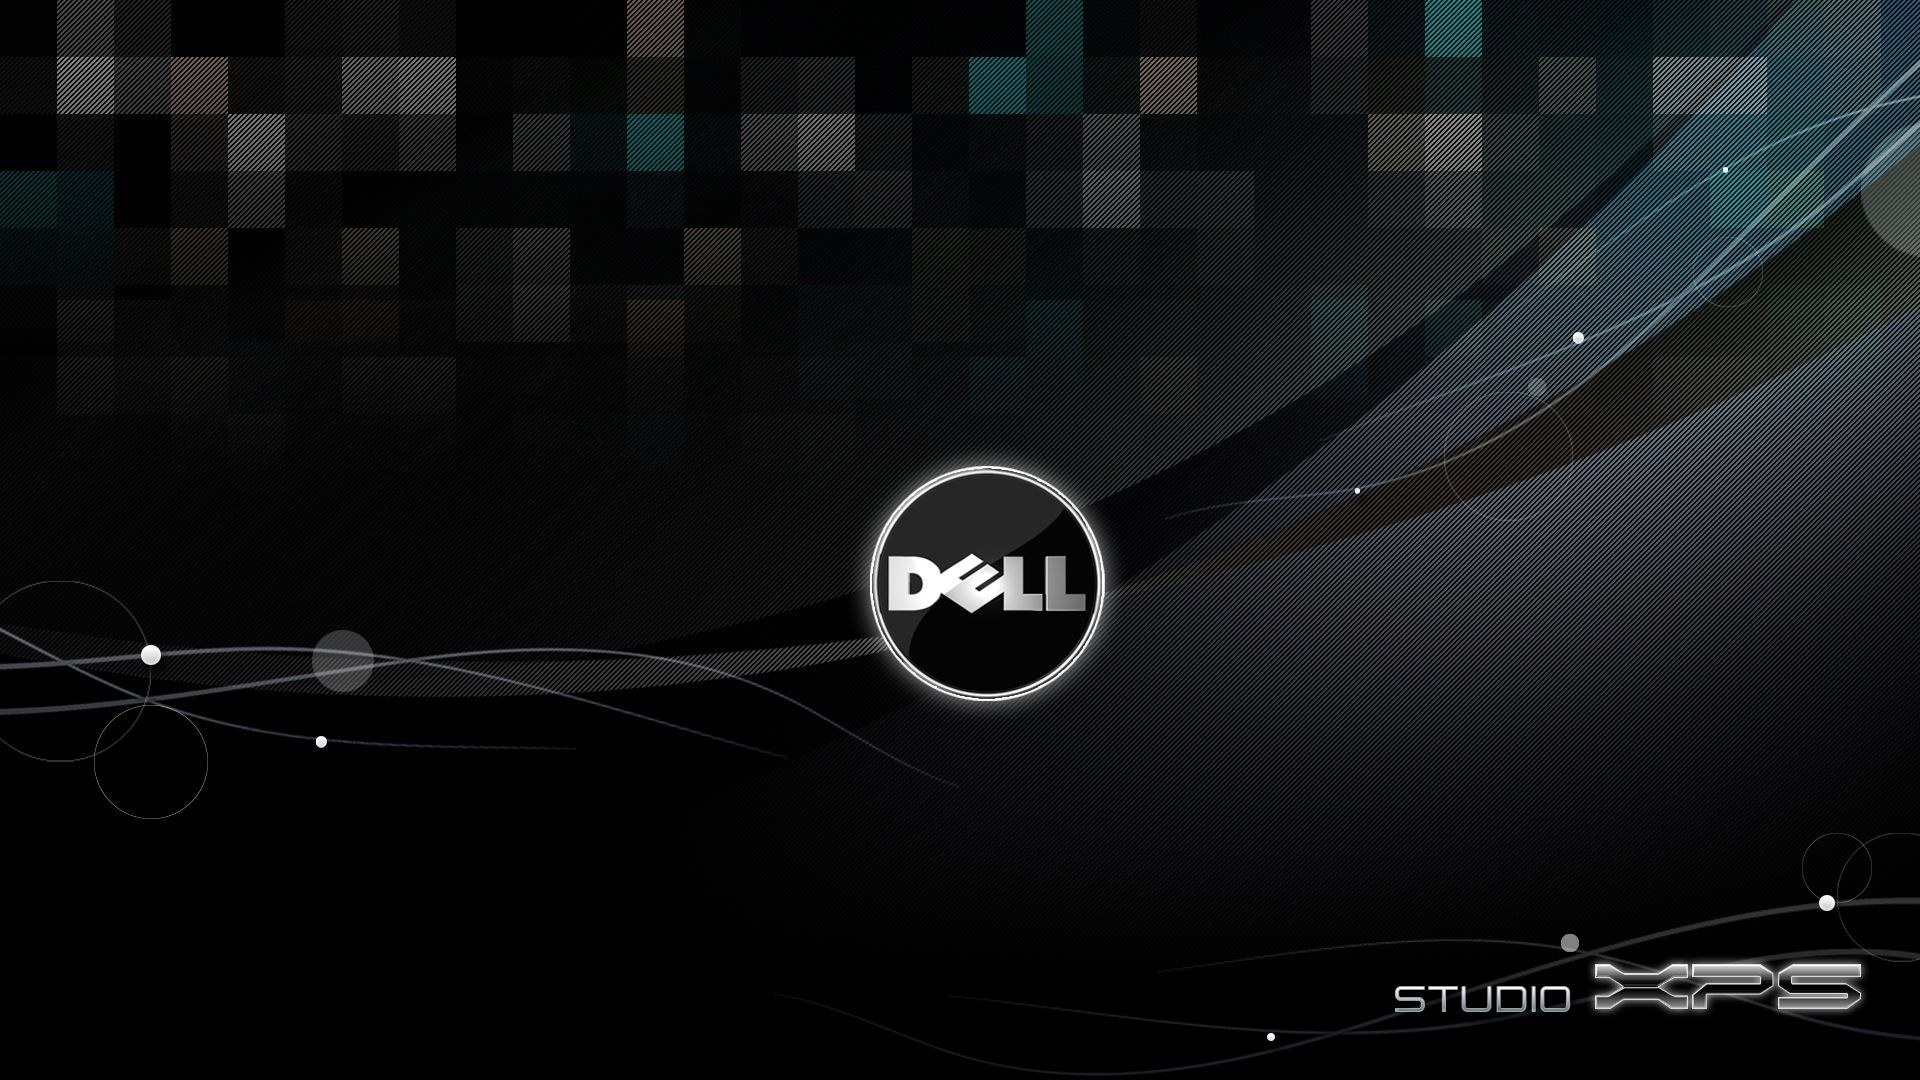 Dell Gaming Laptop Wallpaper Free Dell Gaming Laptop Background